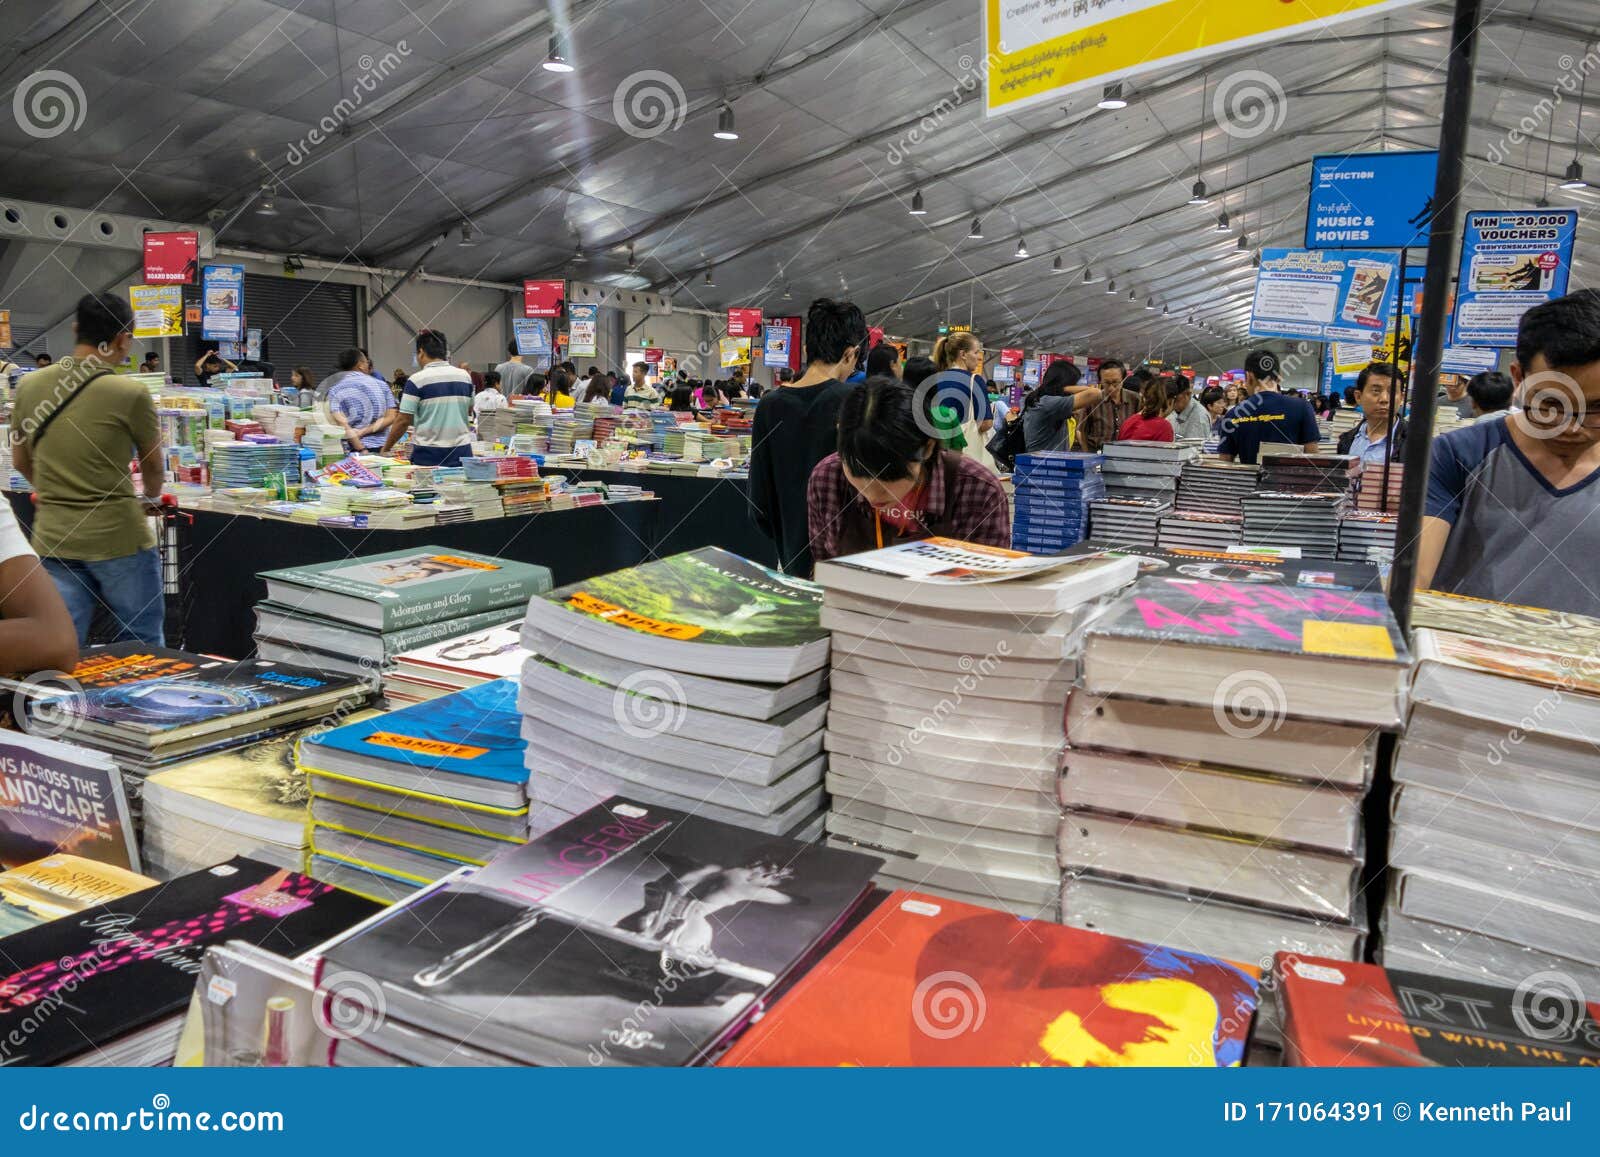 Shoppers At Big Bad Wolf Book Fair In Yangon The World S Biggest Book Sale Editorial Photo Image Of Exposition Asia 171064391